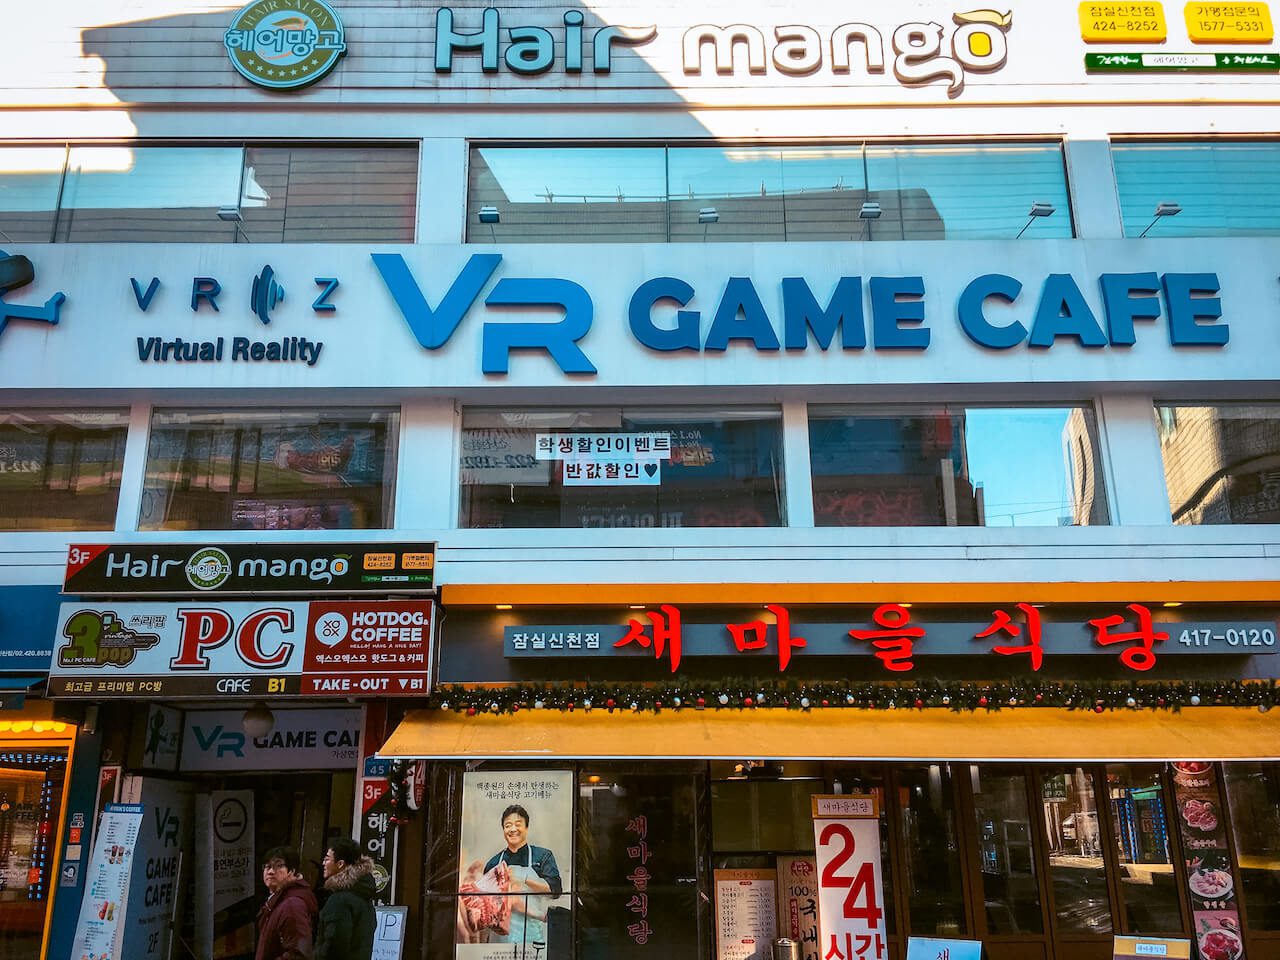 indoor activities in seoul | vr game cafe